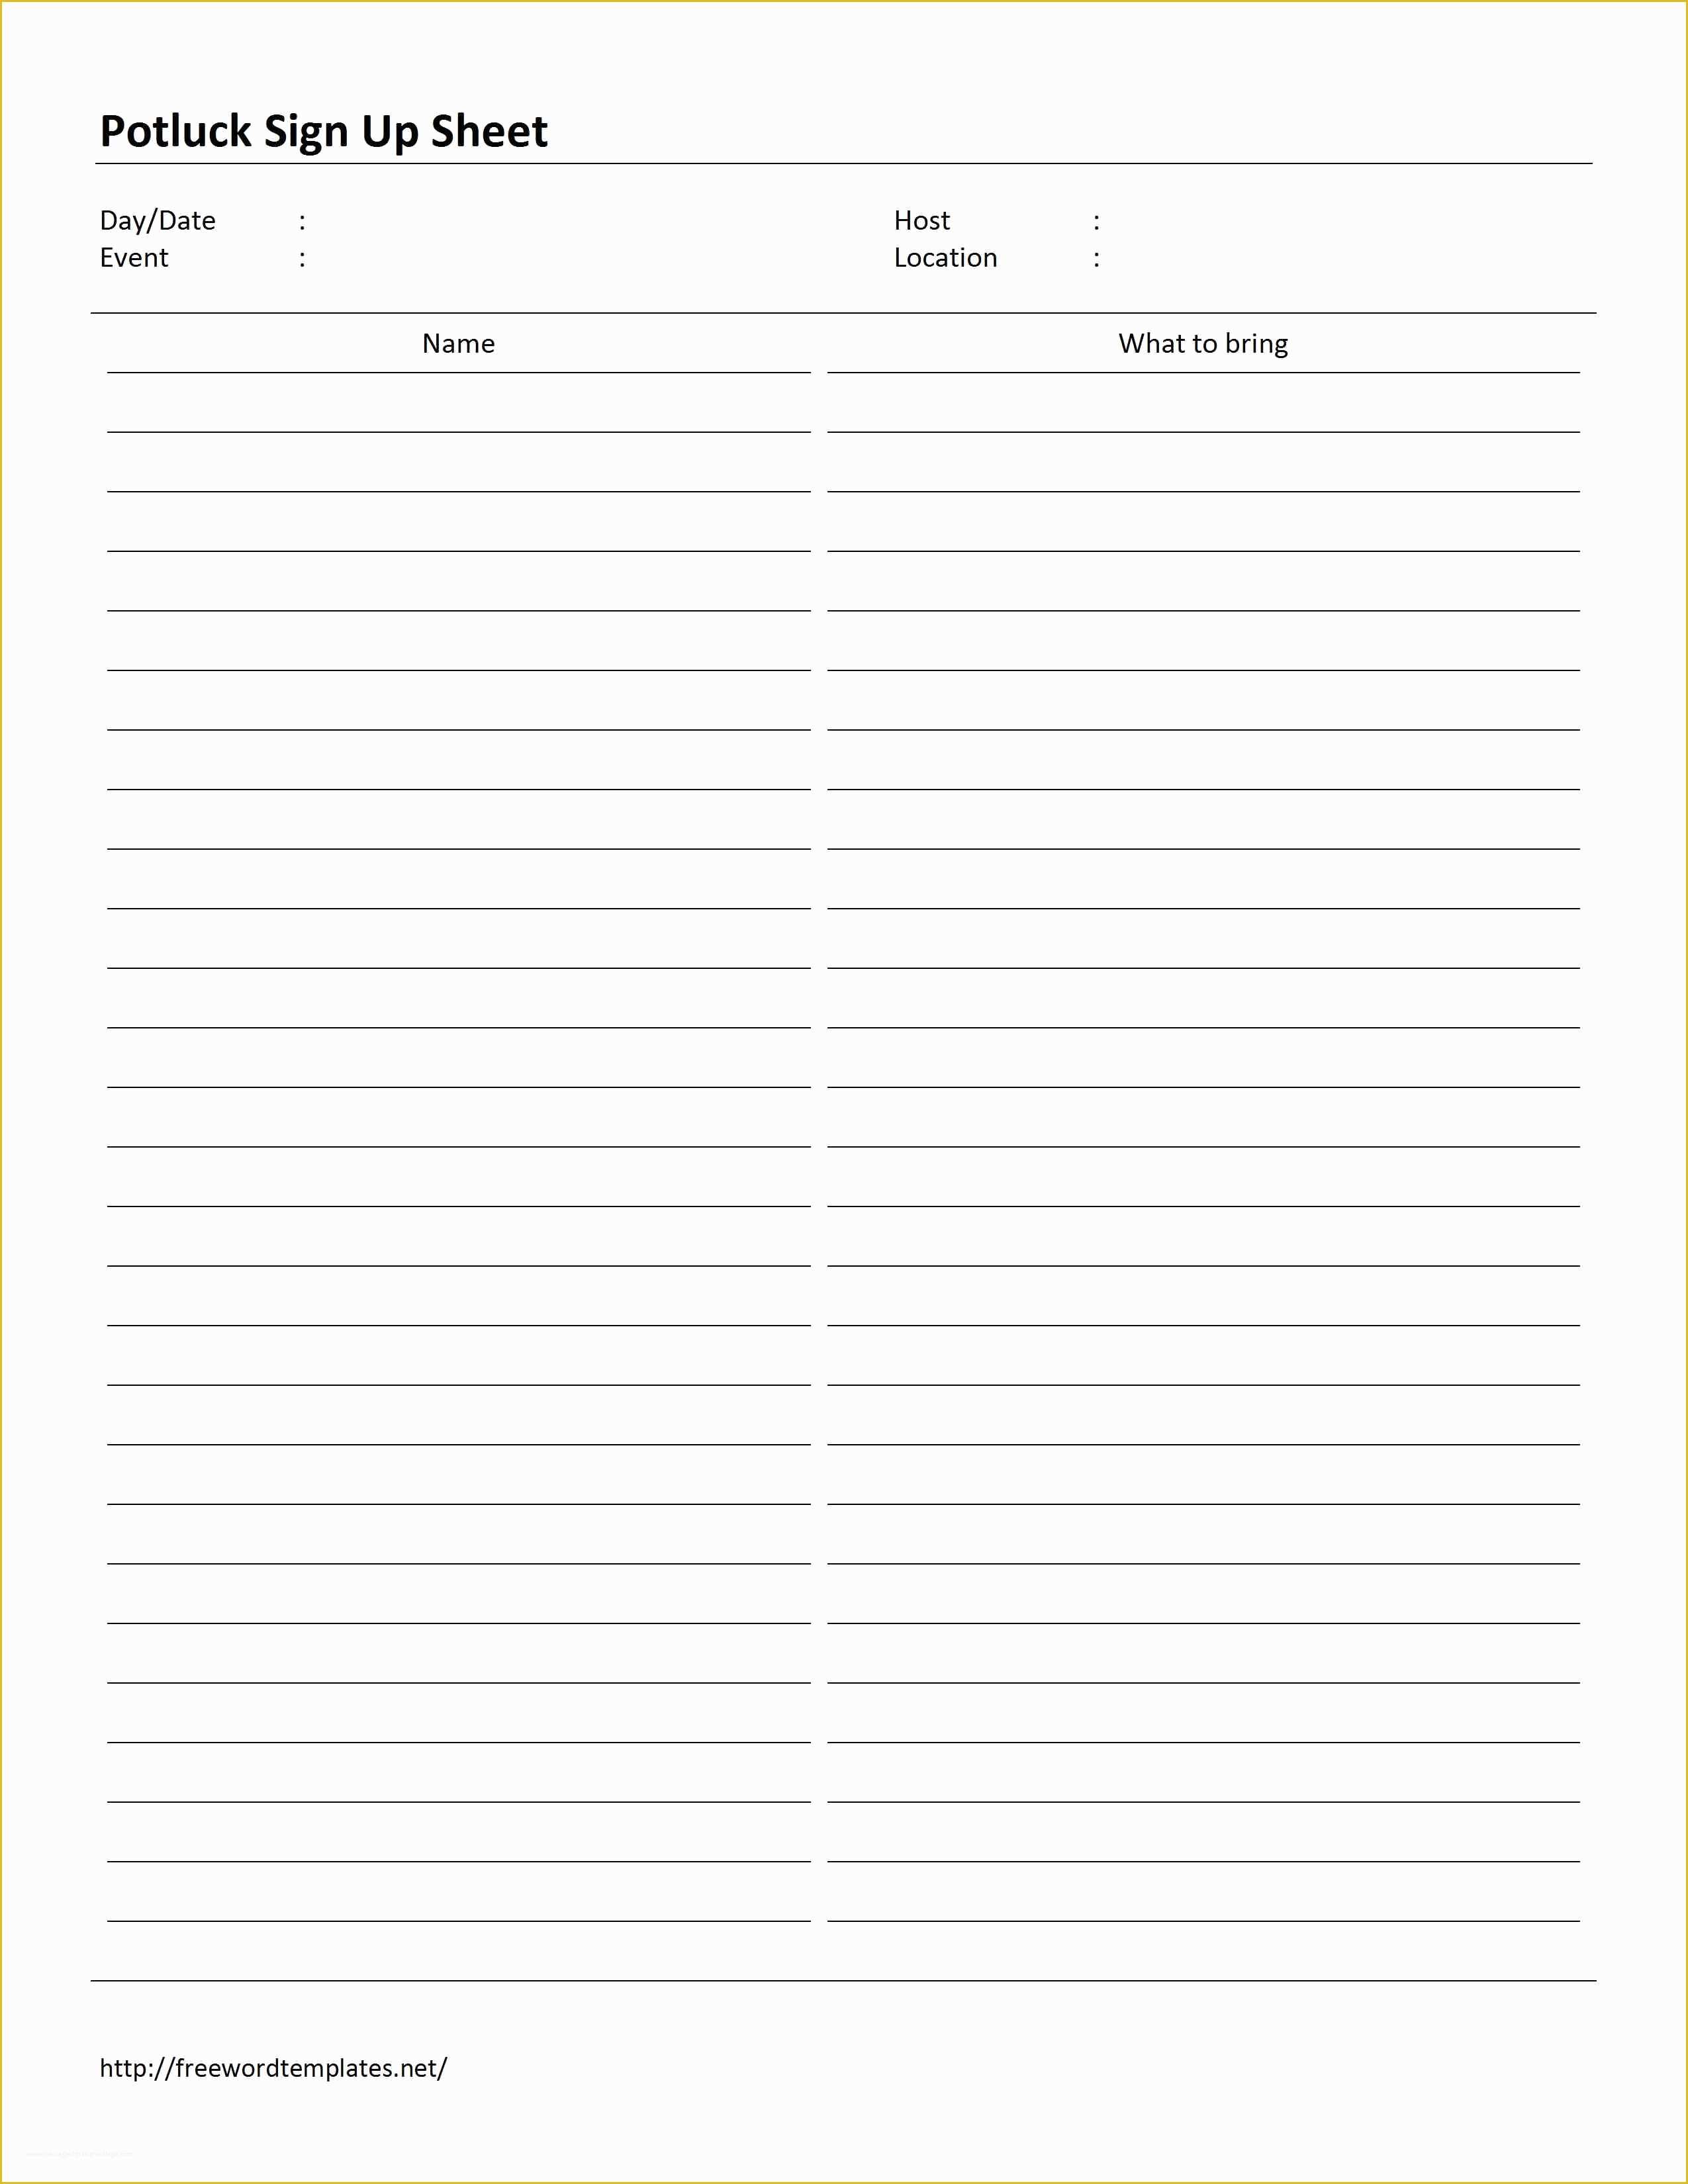 Free Sign Up Sheet Template Of Potluck Sign Up Sheet Template